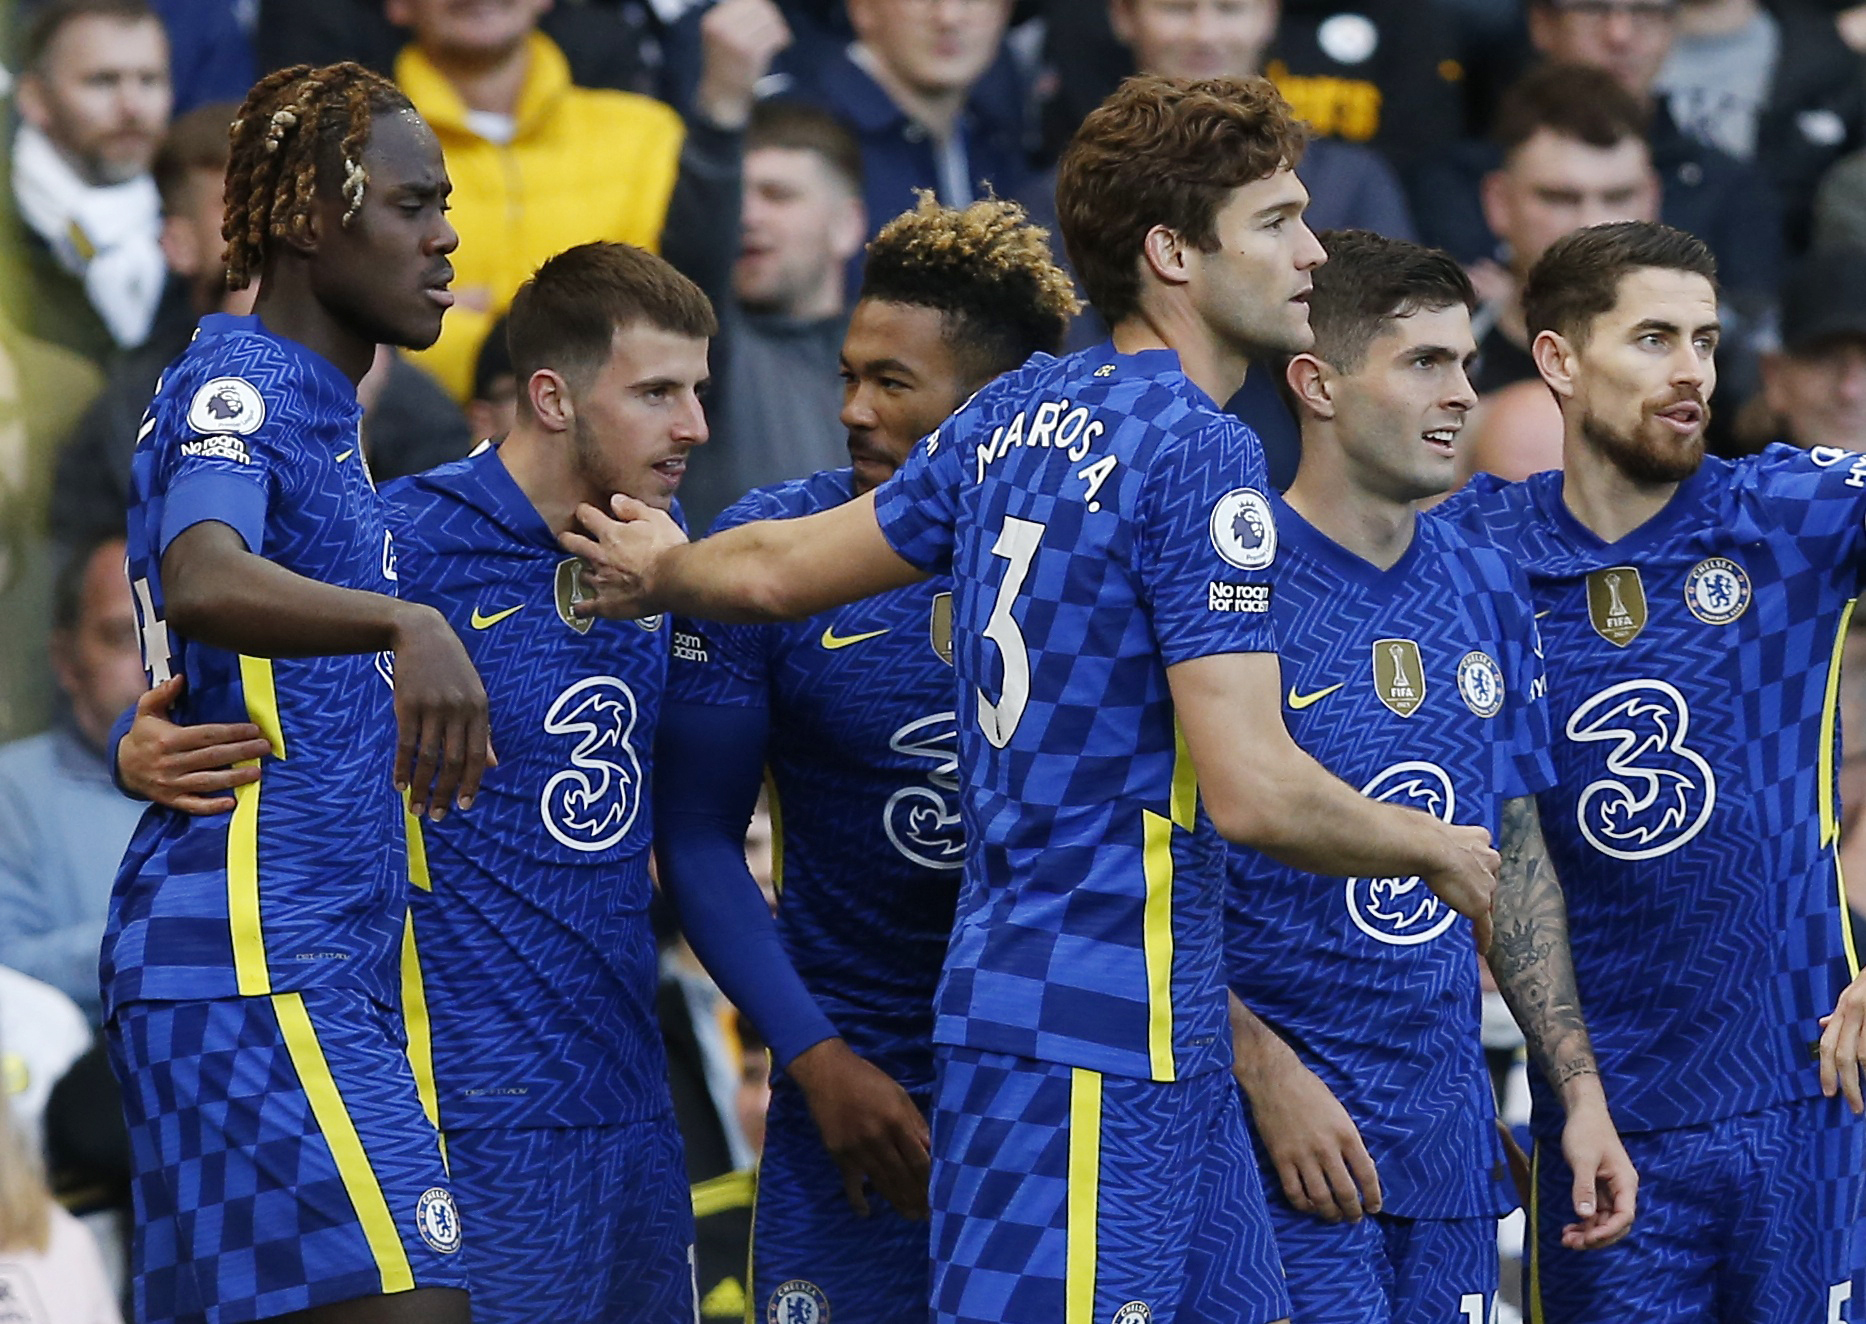 Premier League: Chelsea beat 10-men Leeds United in a 3-0 riot at Elland Road: Lukaku, Mount and Pulisic amongst the goals, Watch Chelsea beat Leeds HIGHLIGHTS